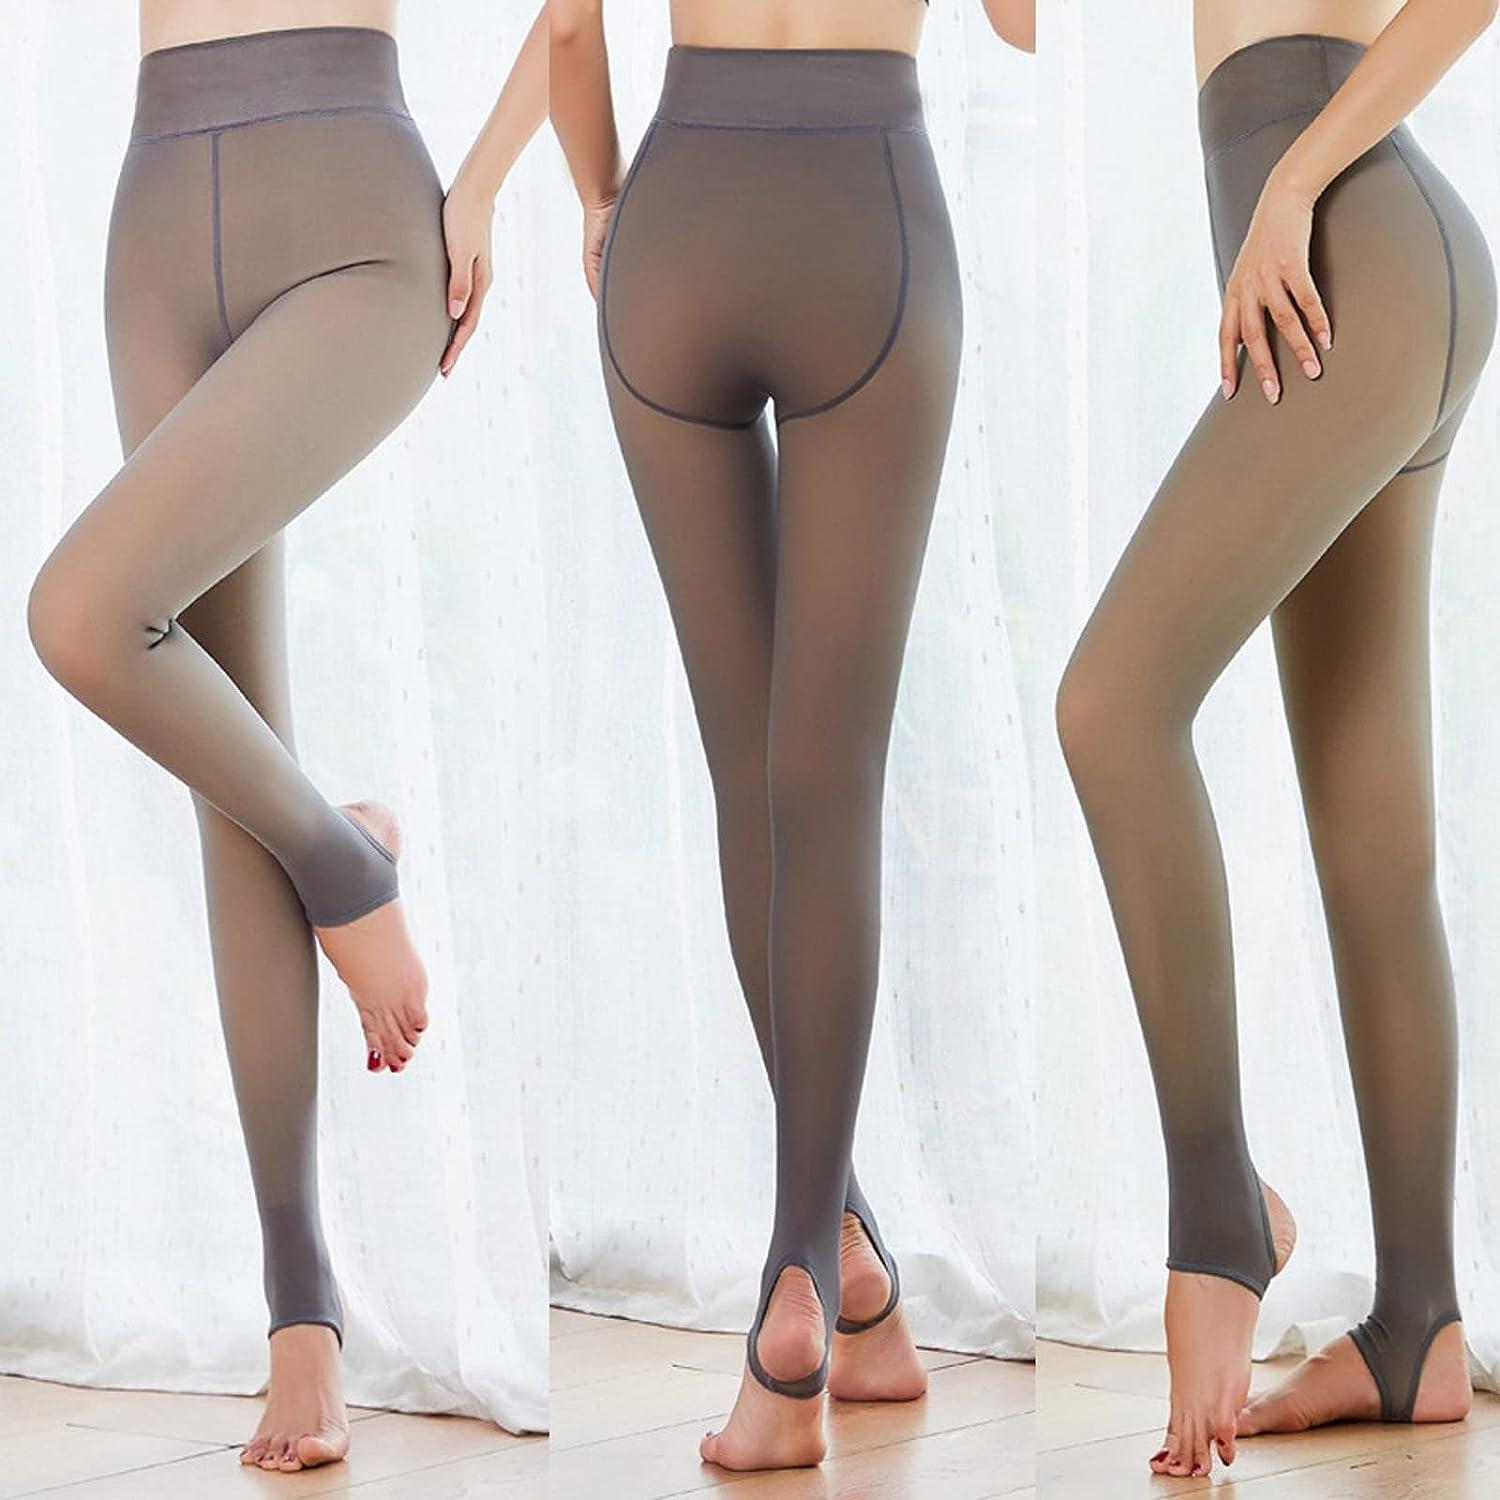 Winter Warm Fleece Pantyhose Lined Natural Skin Color Leggings Slim  Stretchy Tights For Women Outdoor